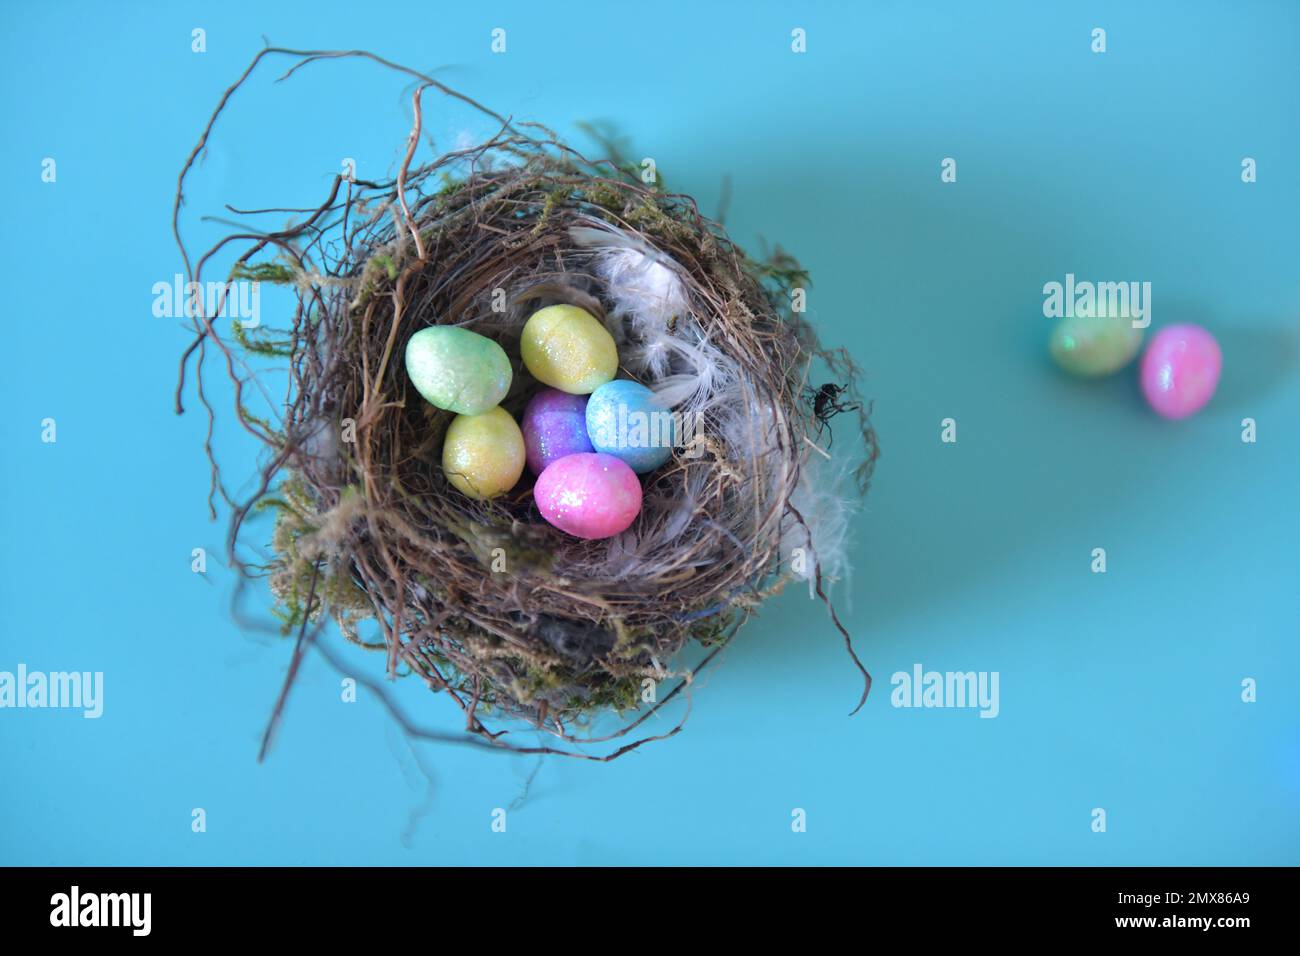 Top view of real bird's nests filled with artificial Easter eggs in multiple colors.  Two more eggs in the background. Stock Photo